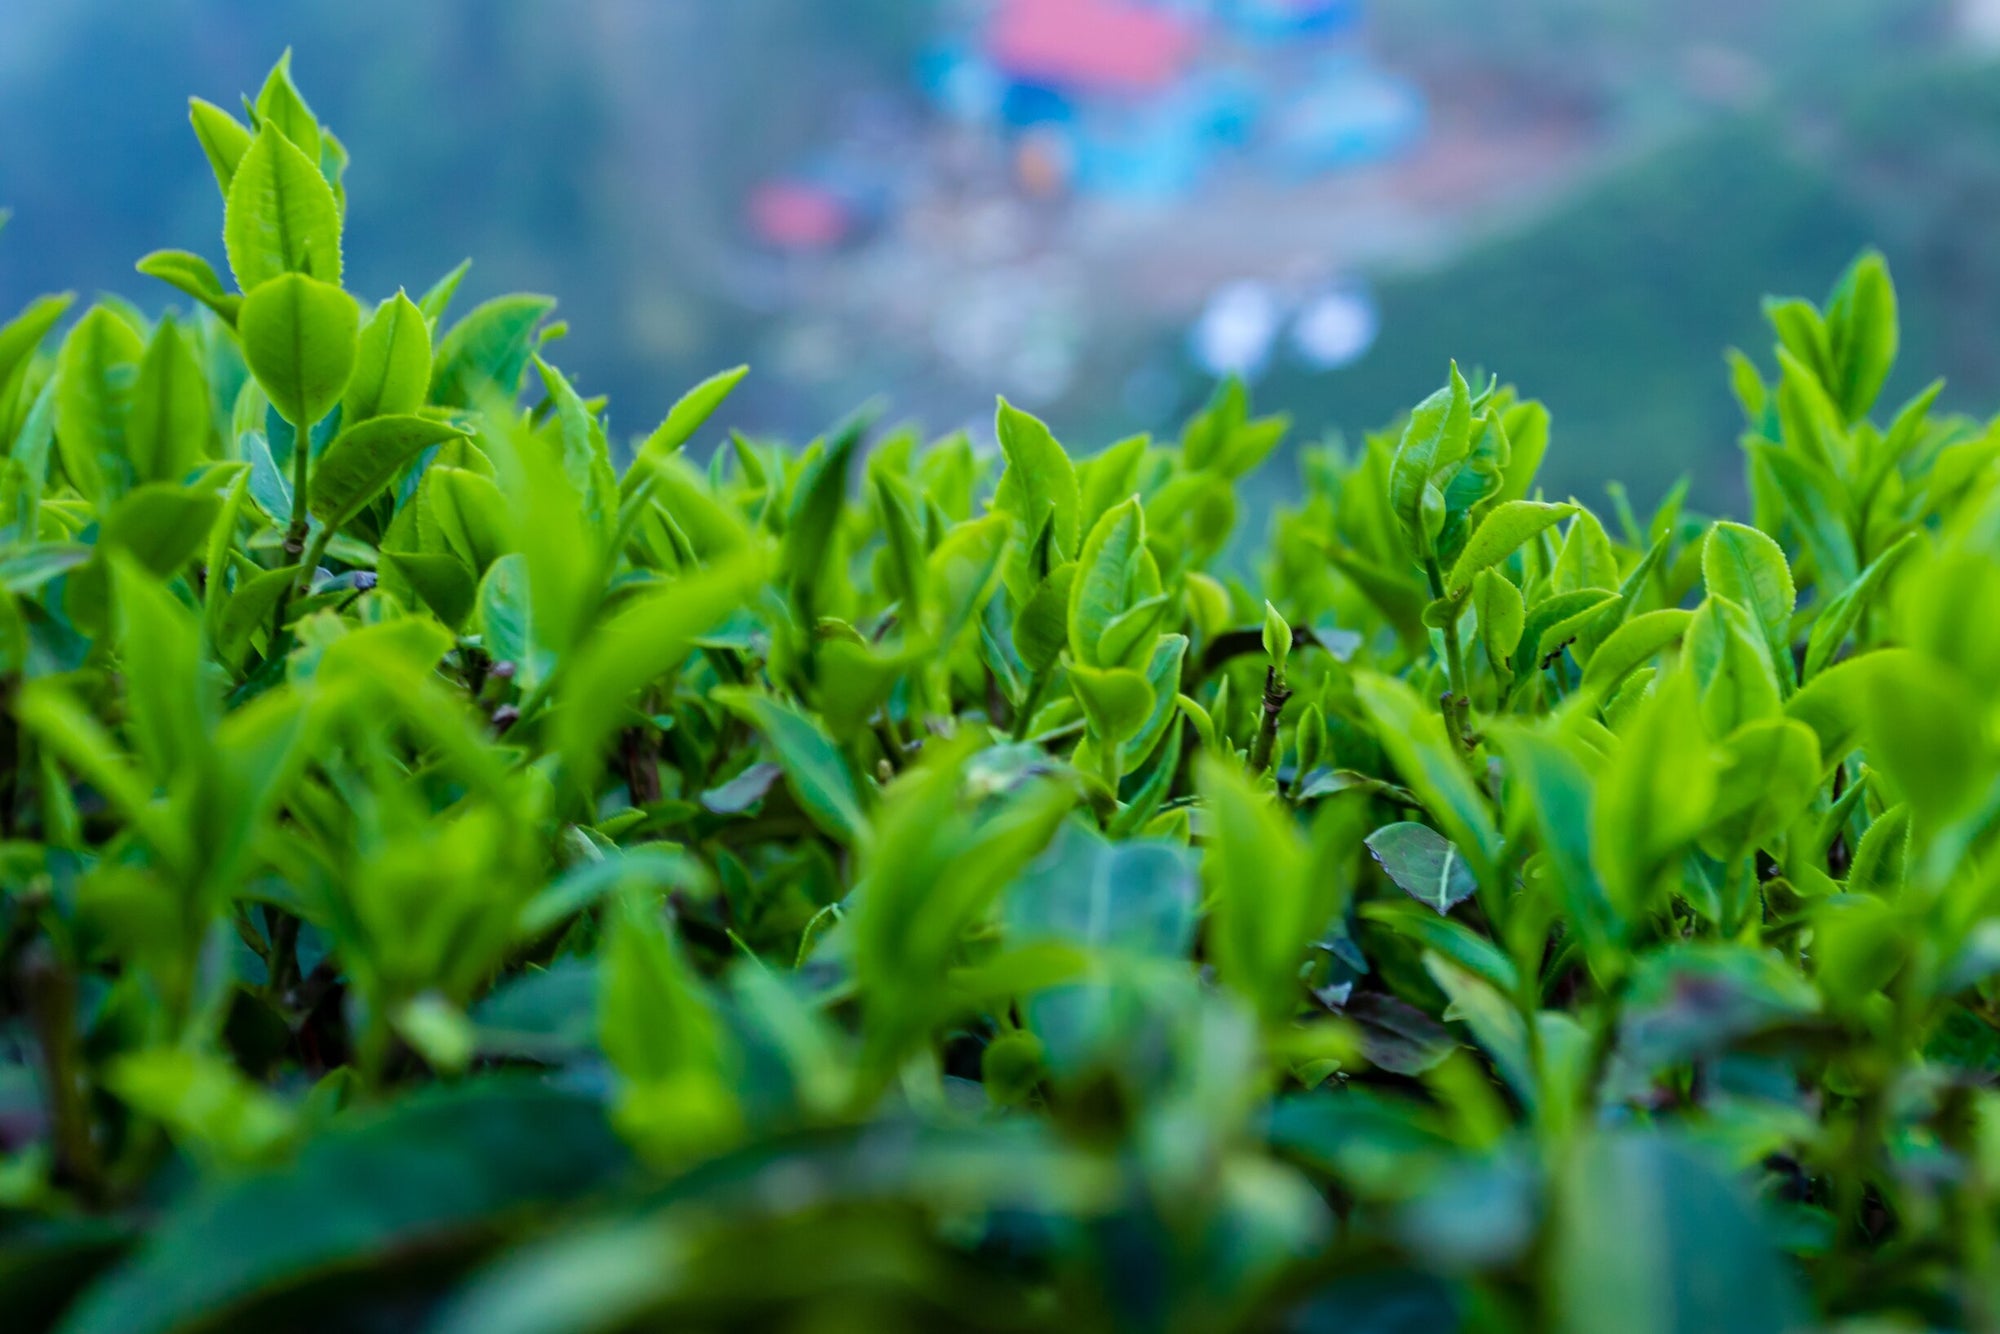 Nepali Tea Sourcing: Tracing the Path of High-Quality Teas from Farm to Market